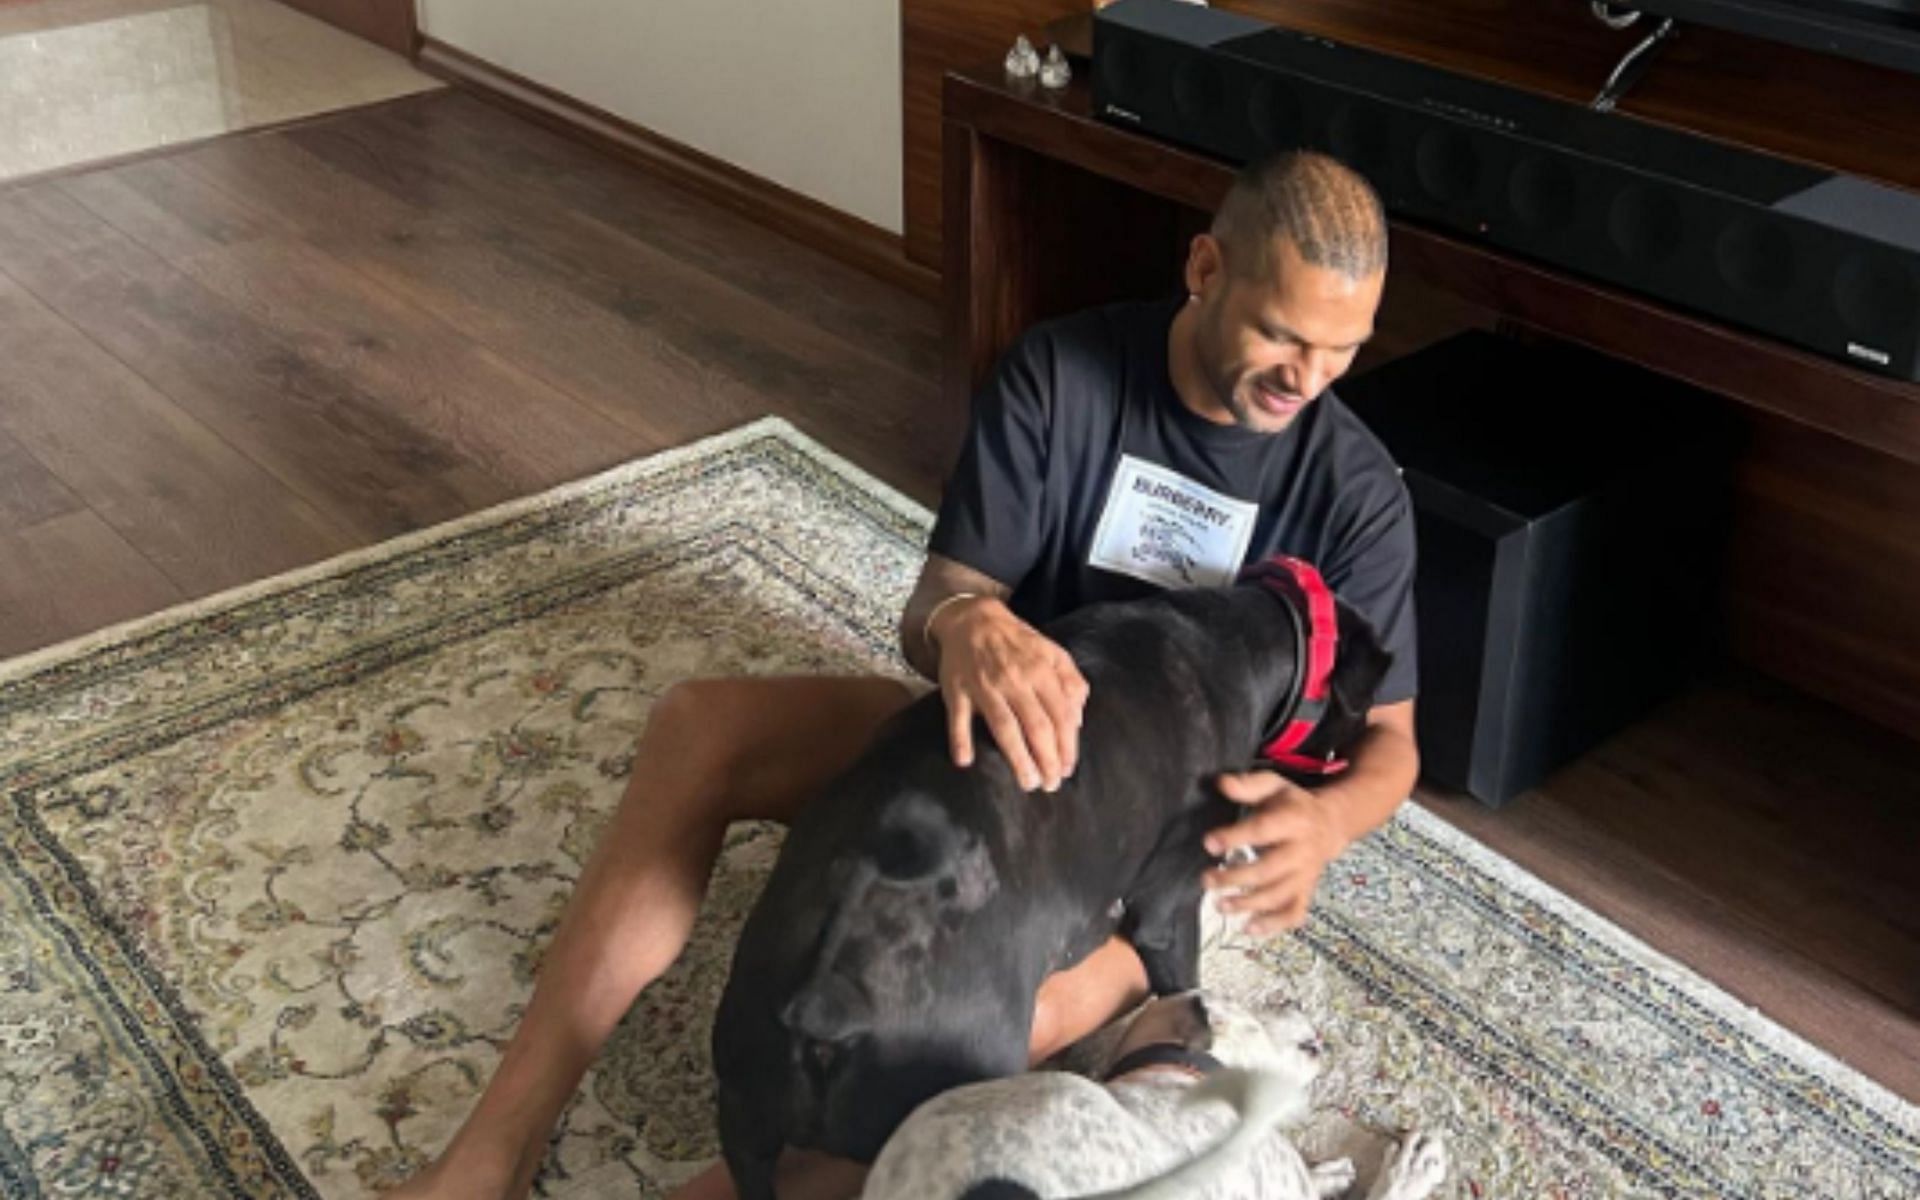 Shikhar Dhawan with his pets. (P/C: Instagram)